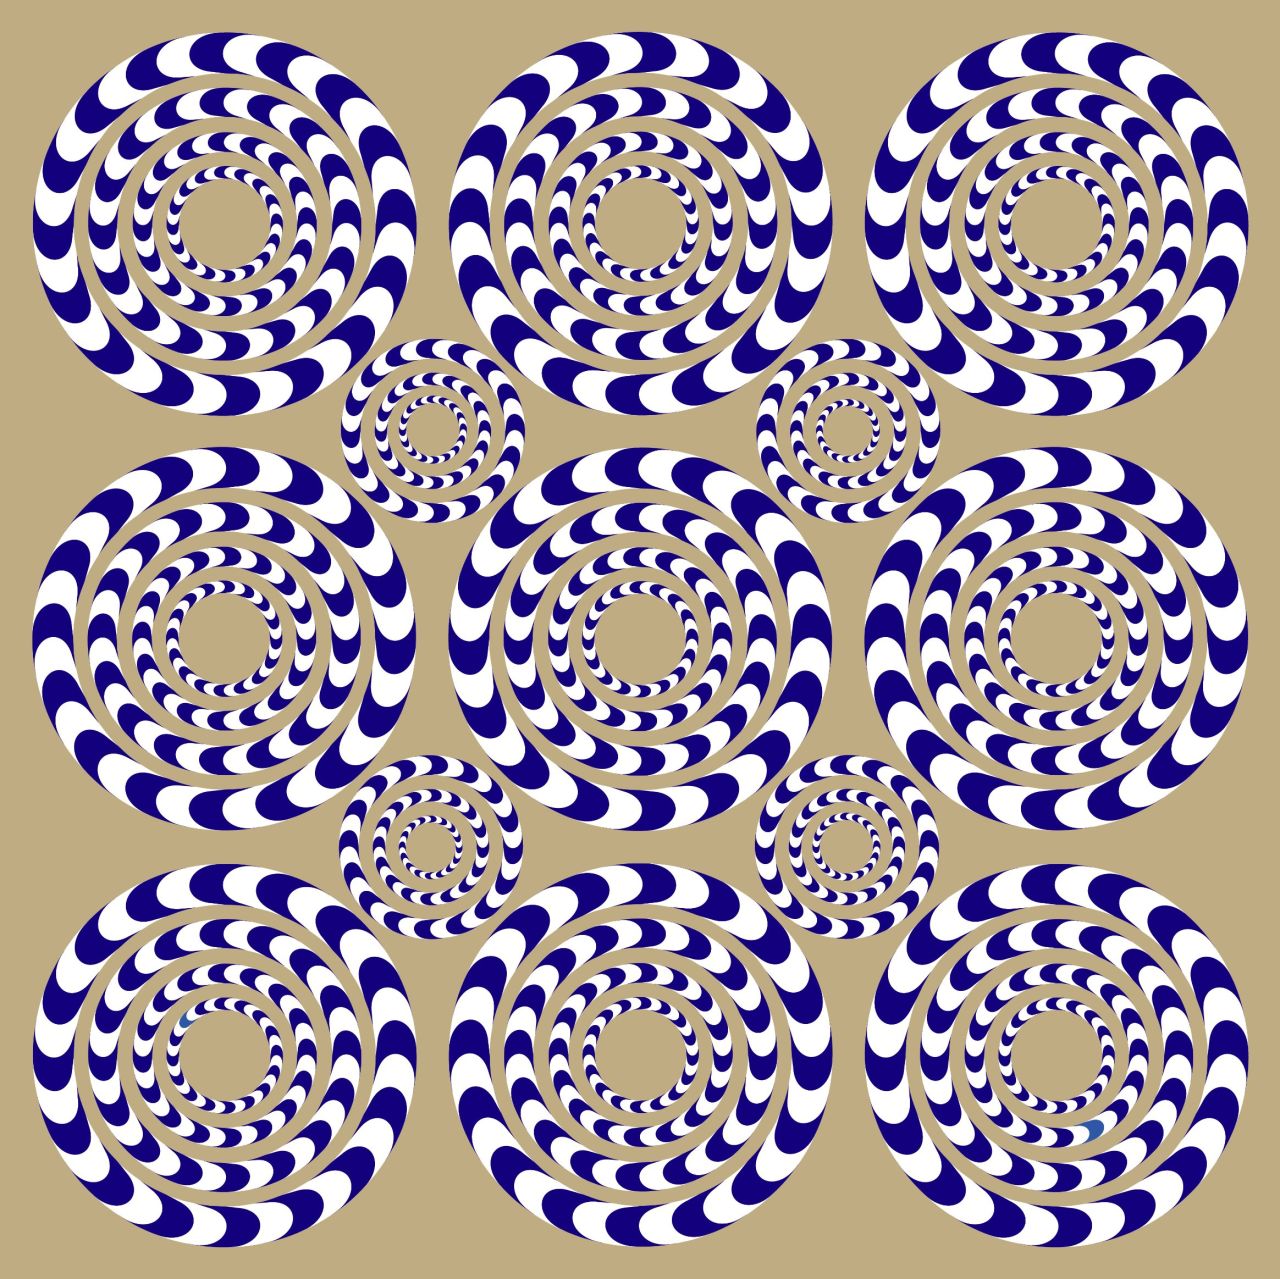 If you move your head while staring at these circles, they will appear to rotate or spin. But that movement is only an illusion.